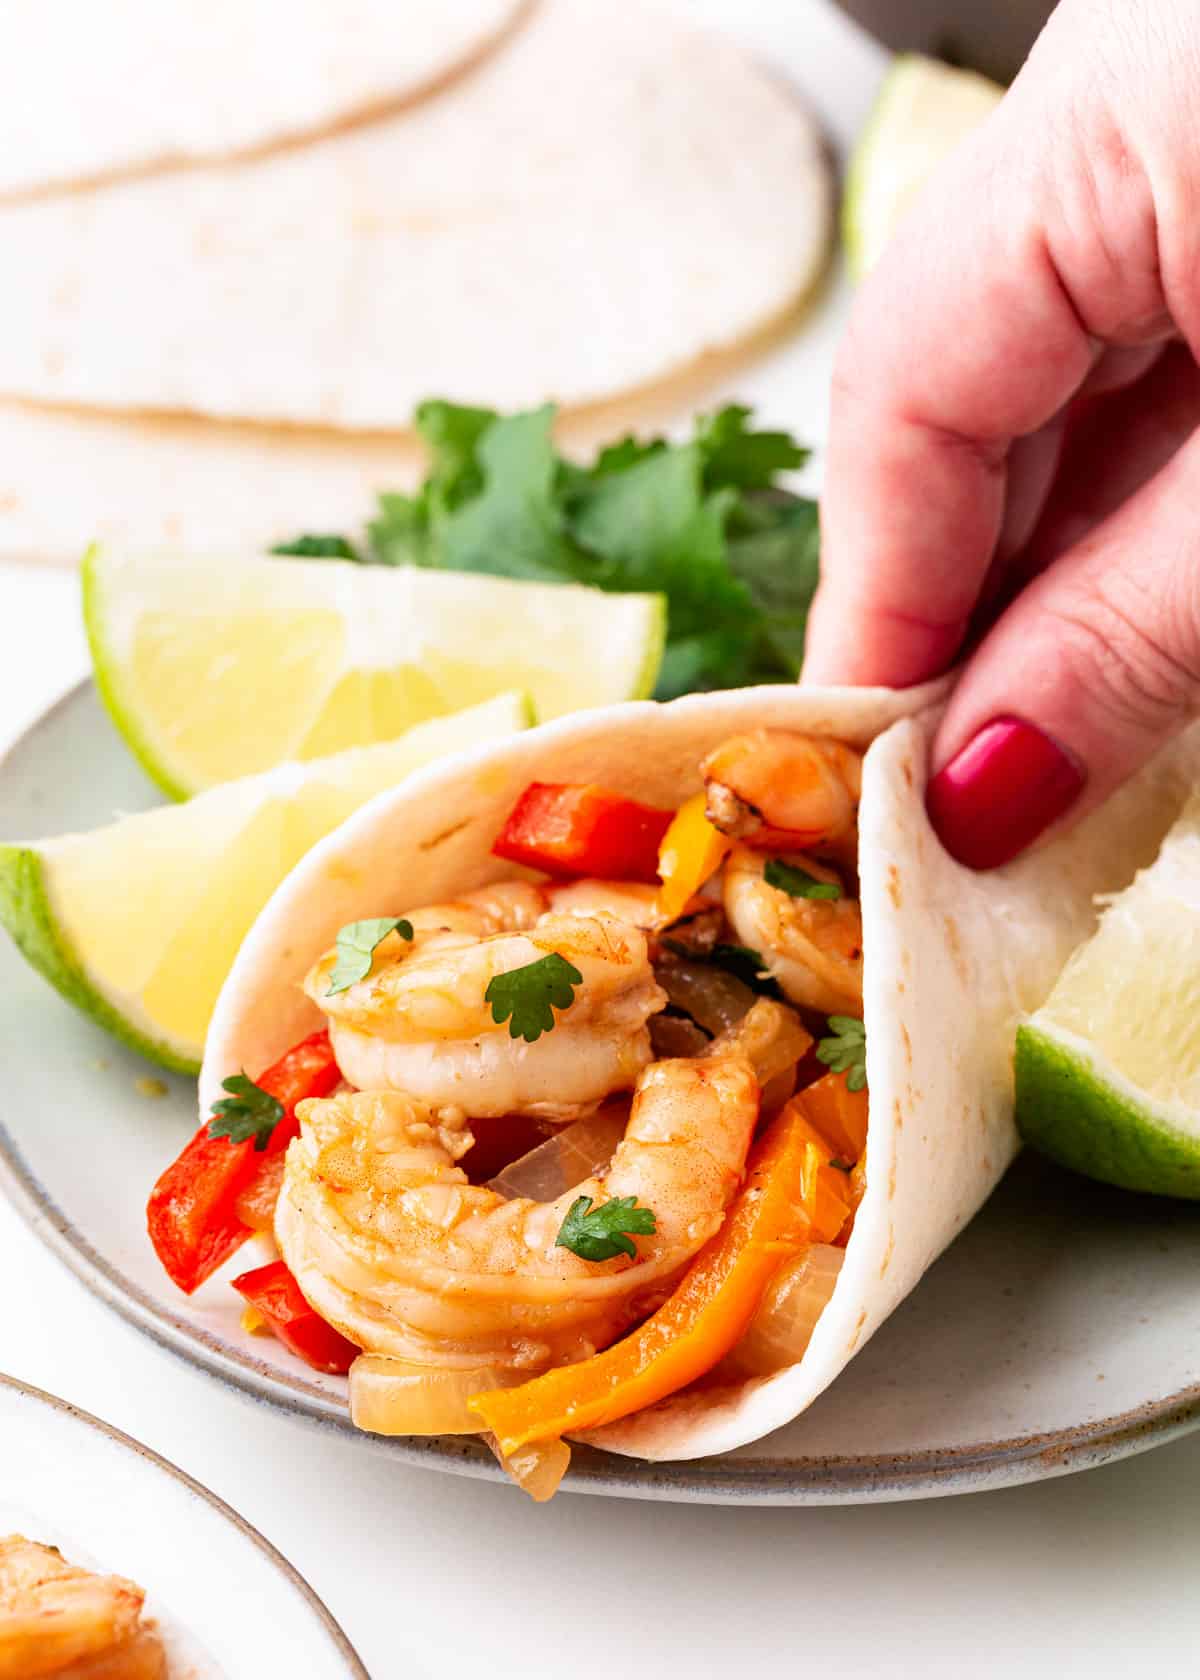 Shrimp fajitas rolled up in a soft taco shell.